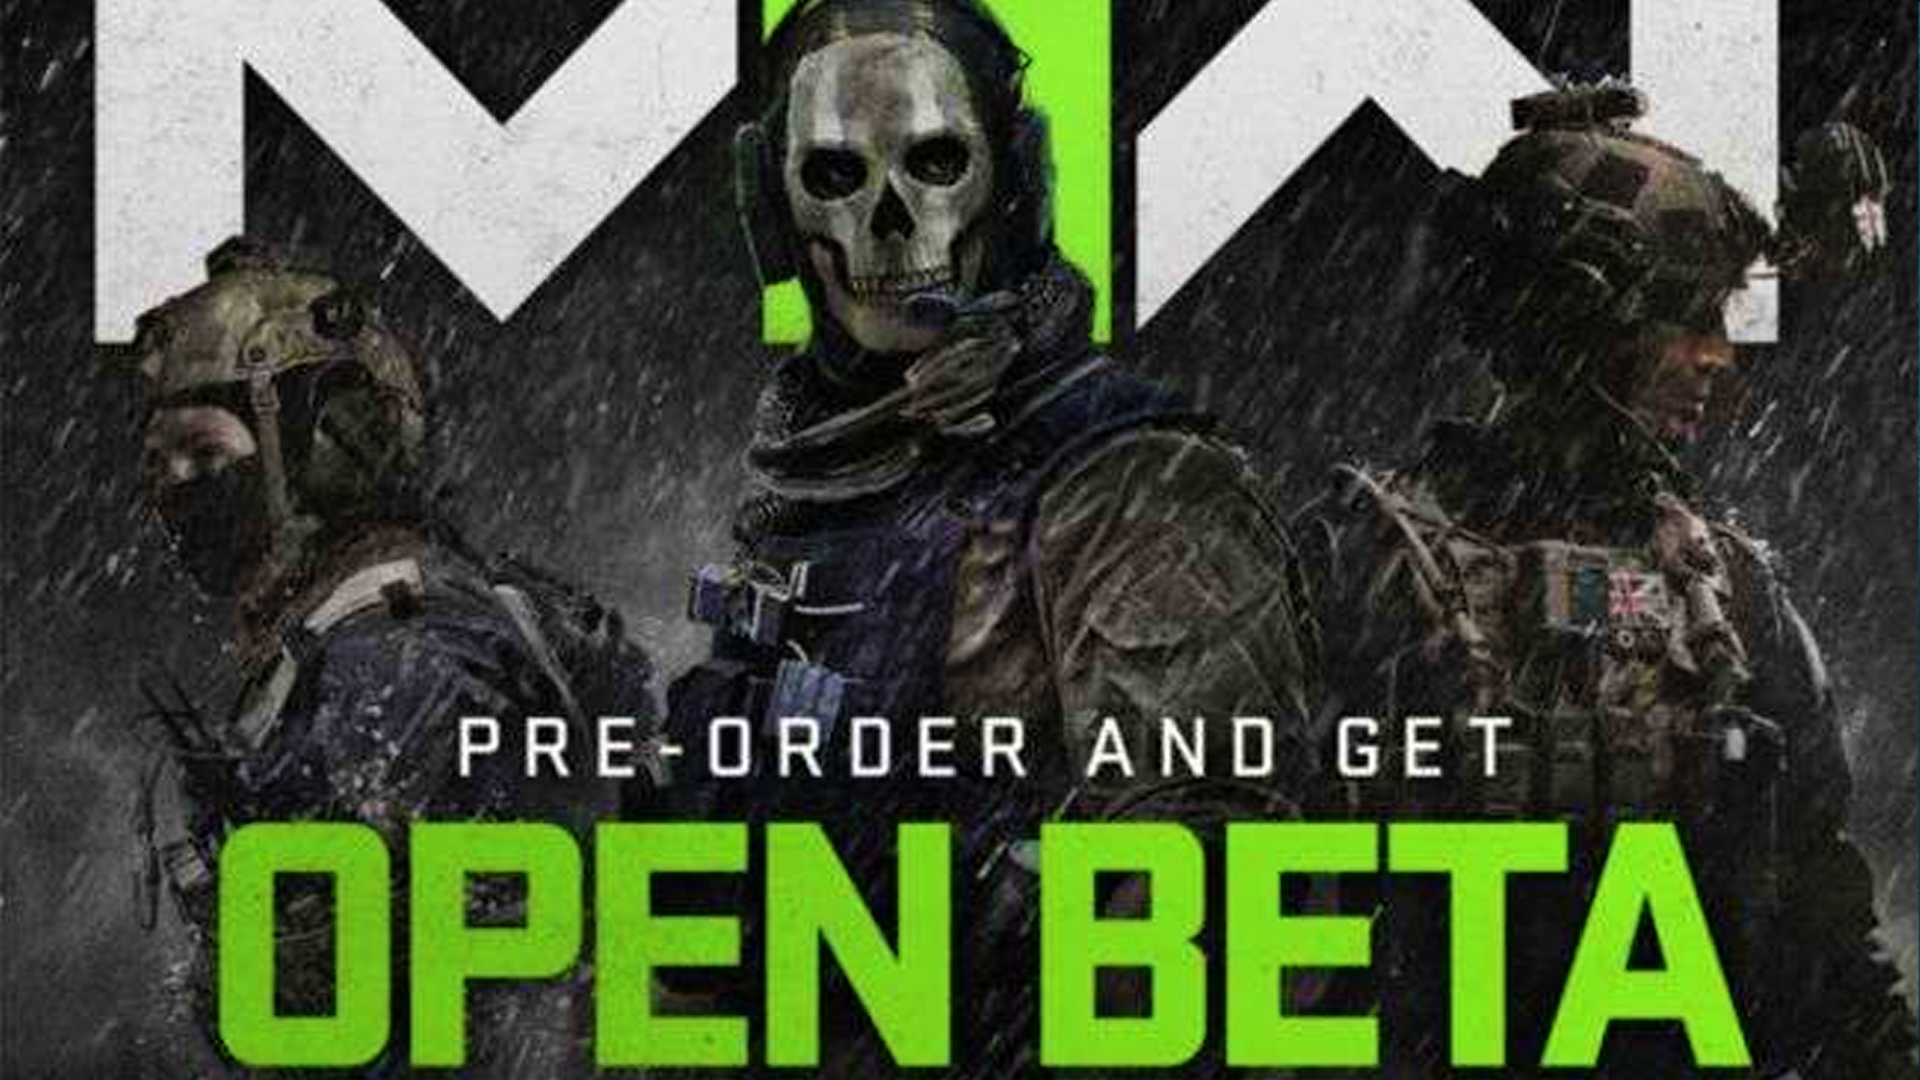 GAME.co.uk on X: 💀Call of Duty®: Modern Warfare 2 ships October 28th💀  Pre-order now and get a Call Of Duty®: Modern Warfare 2 Beta download  code💣 Check out the GAME Exclusive Steelbook